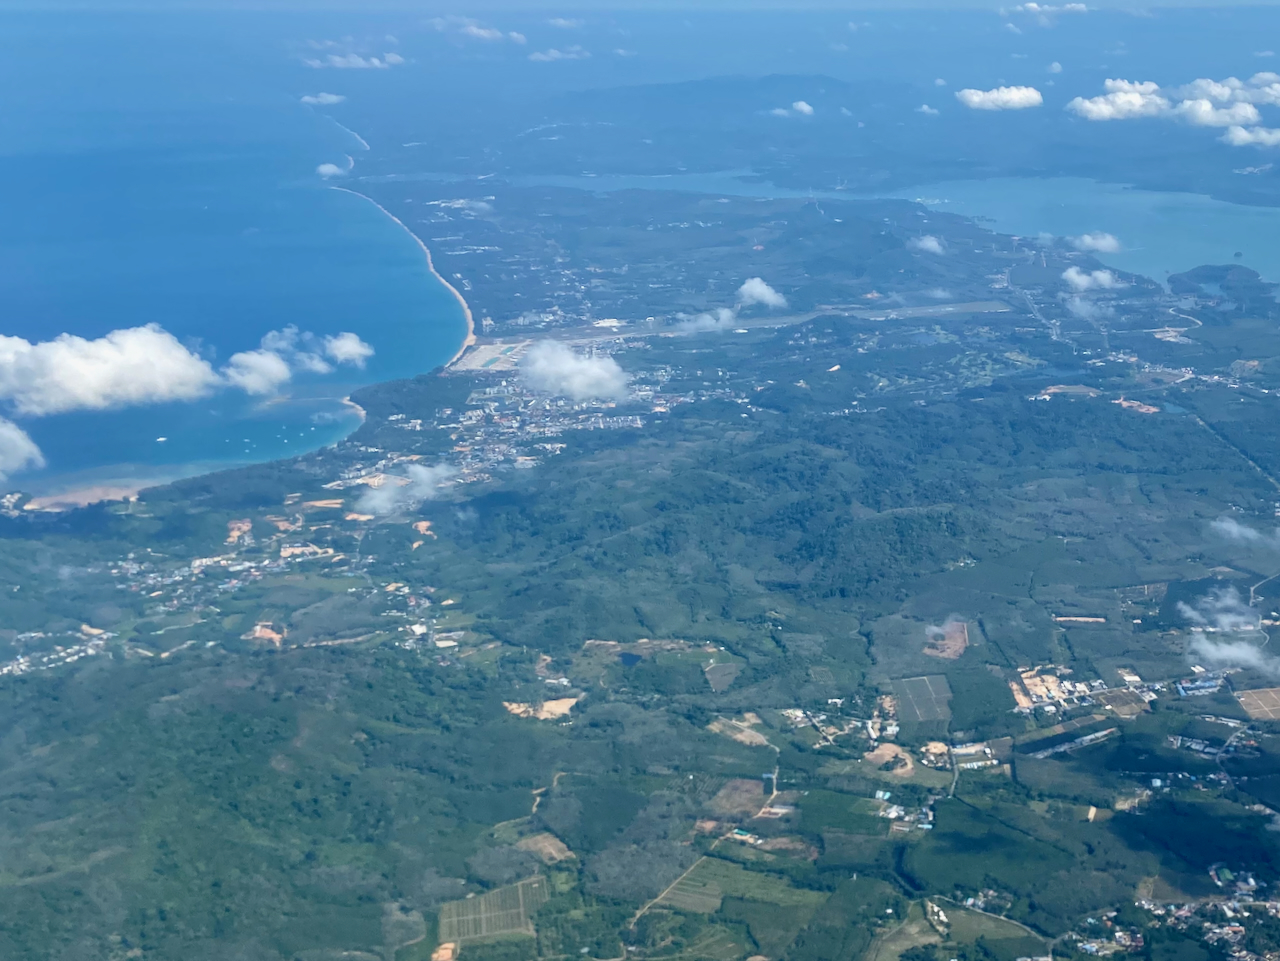 Phuket airport (top center in the picture) is the route for holidaymakers to reach the holiday island. Either by international long-haul flight or by domestic flight. Photo: Sascha Tegtmeyer